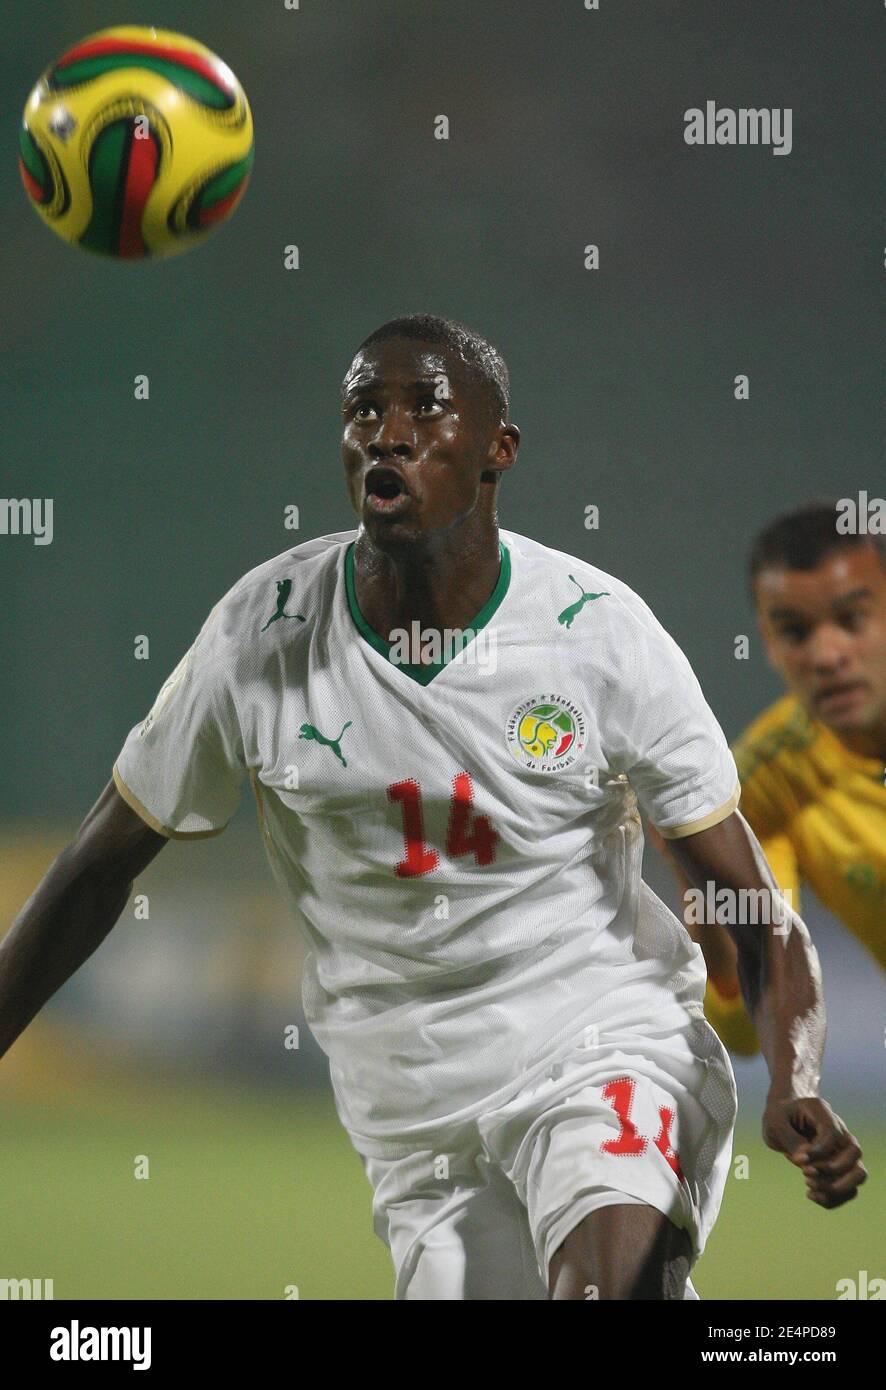 Senegal's Papa Waigo NDiaye during the African Cup of Nations soccer match, Senegal vs South Africa in Kumasi, Ghana on January 31, 2008. The match ended in a 1-1 draw. Senegal failed to qualify for the next round of the competition. Photo by Steeve McMay/Cameleon/ABACAPRESS.COM Stock Photo